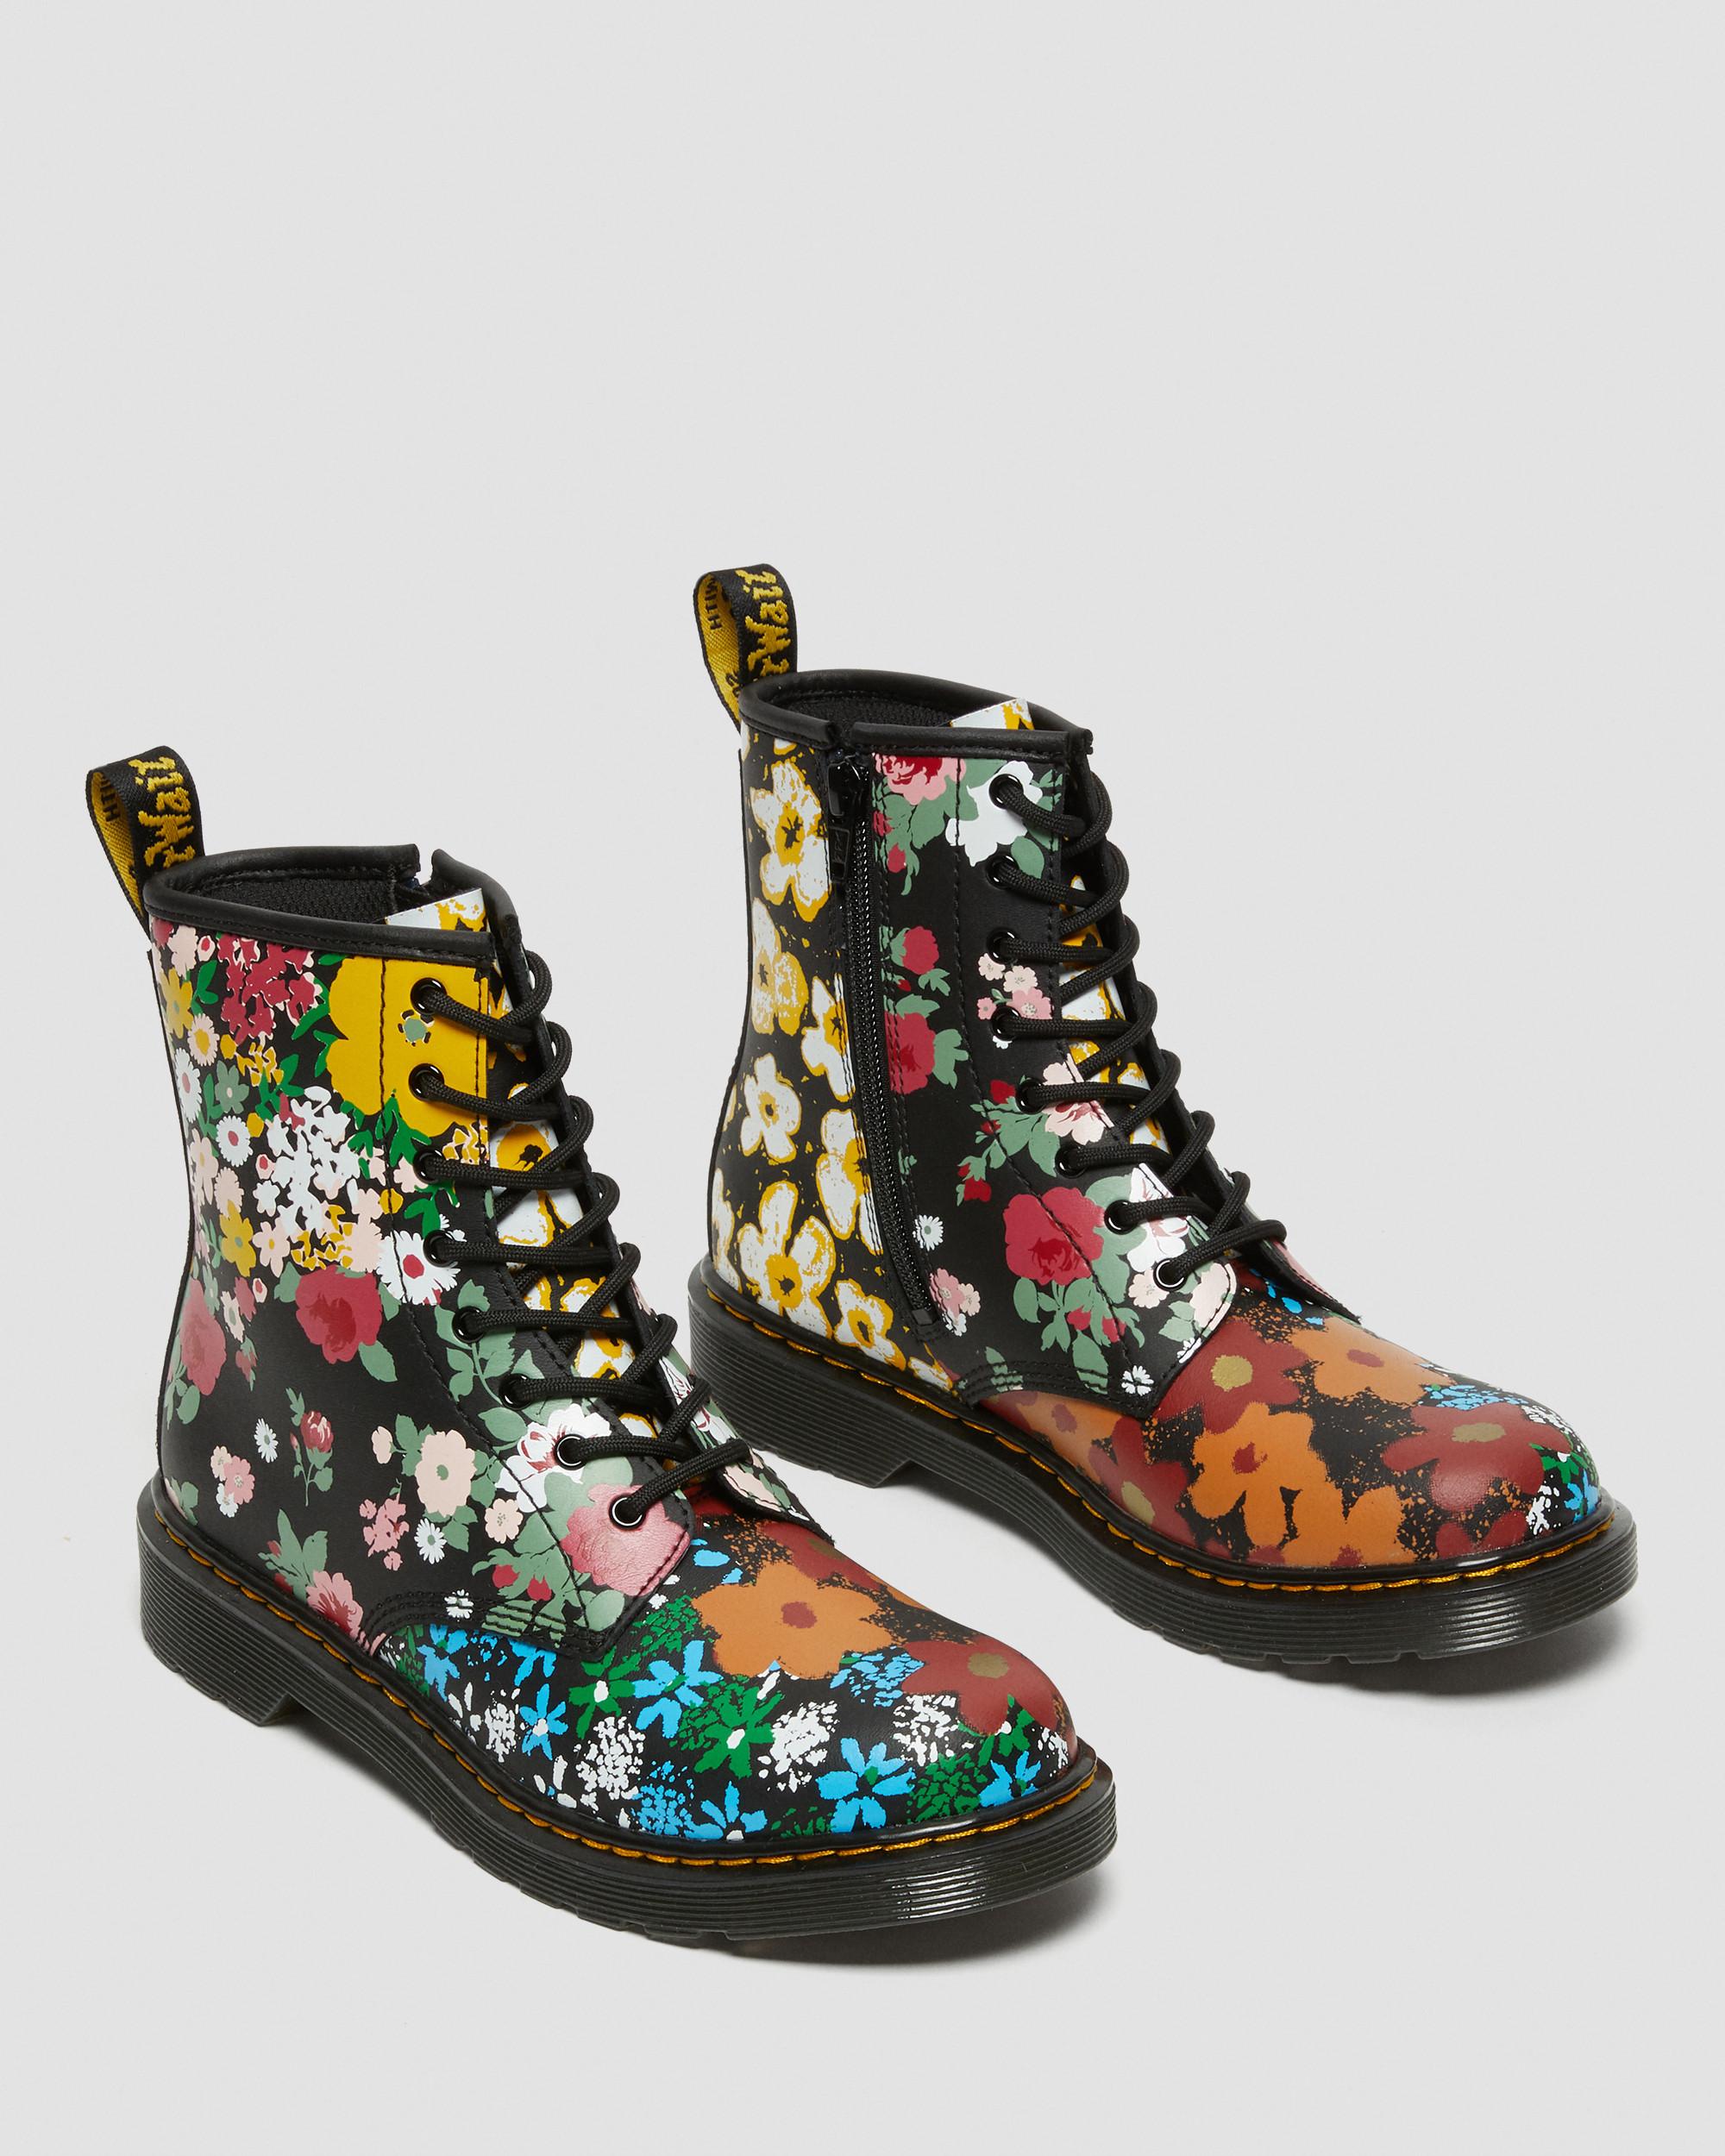 Leather Lace Floral Black Youth 1460 Up Boots Dr. Mash | Martens in Up